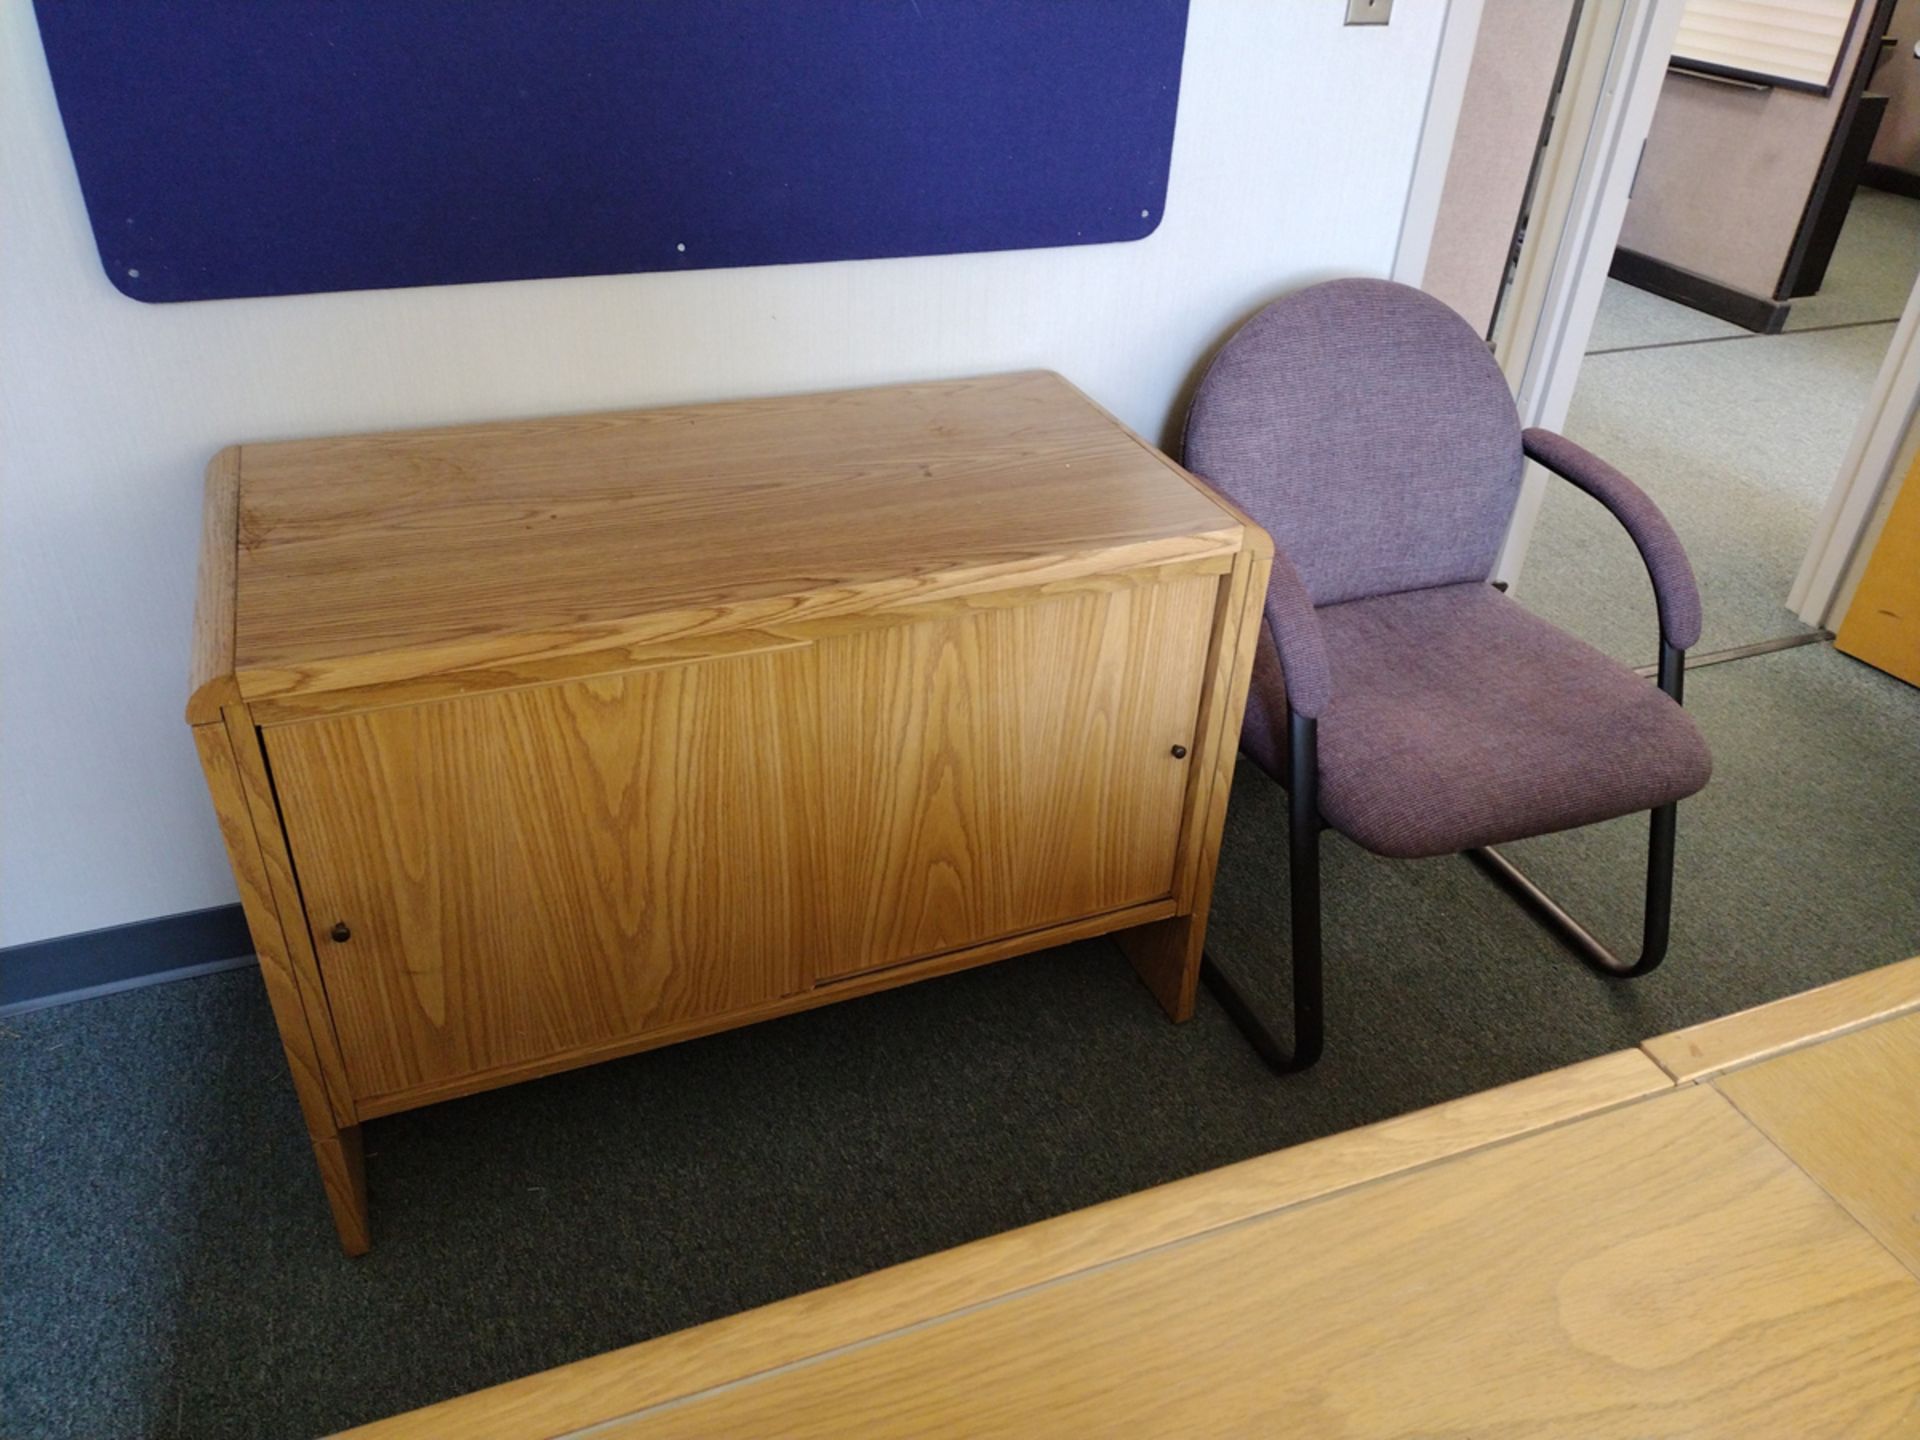 Group of Office Furniture Throughout Rooms - Image 6 of 14